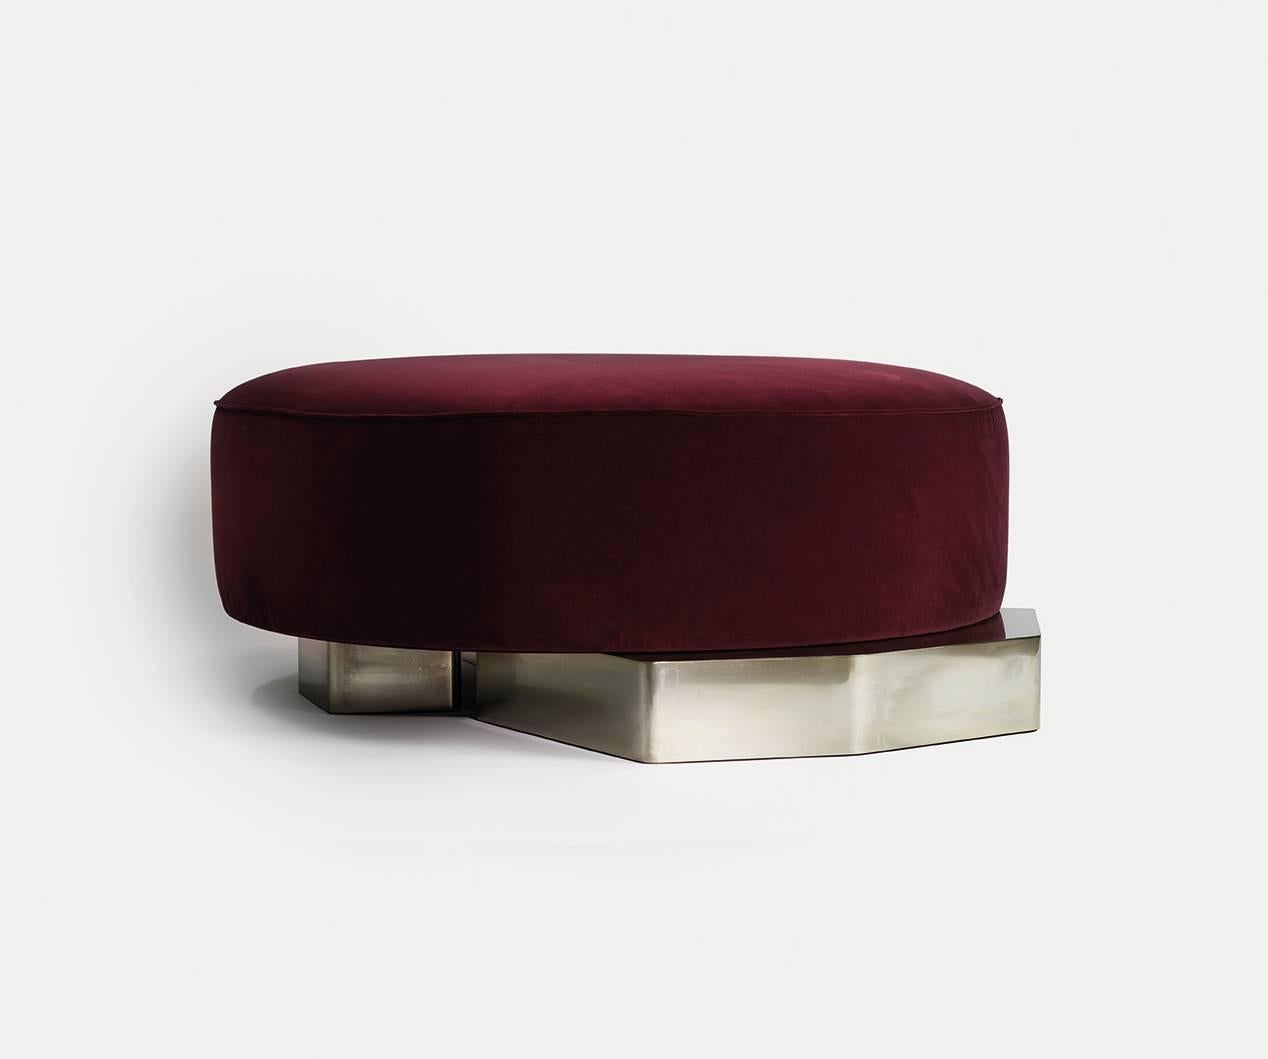 Flat POUF, 2018 is a Century 21st Collectible Modern luxury piece realised with a bordeaux cotton velvet and silver patinated brass base. Handcrafted details render this piece a sophisticated seating item ideal for the center of a foyer, or as a